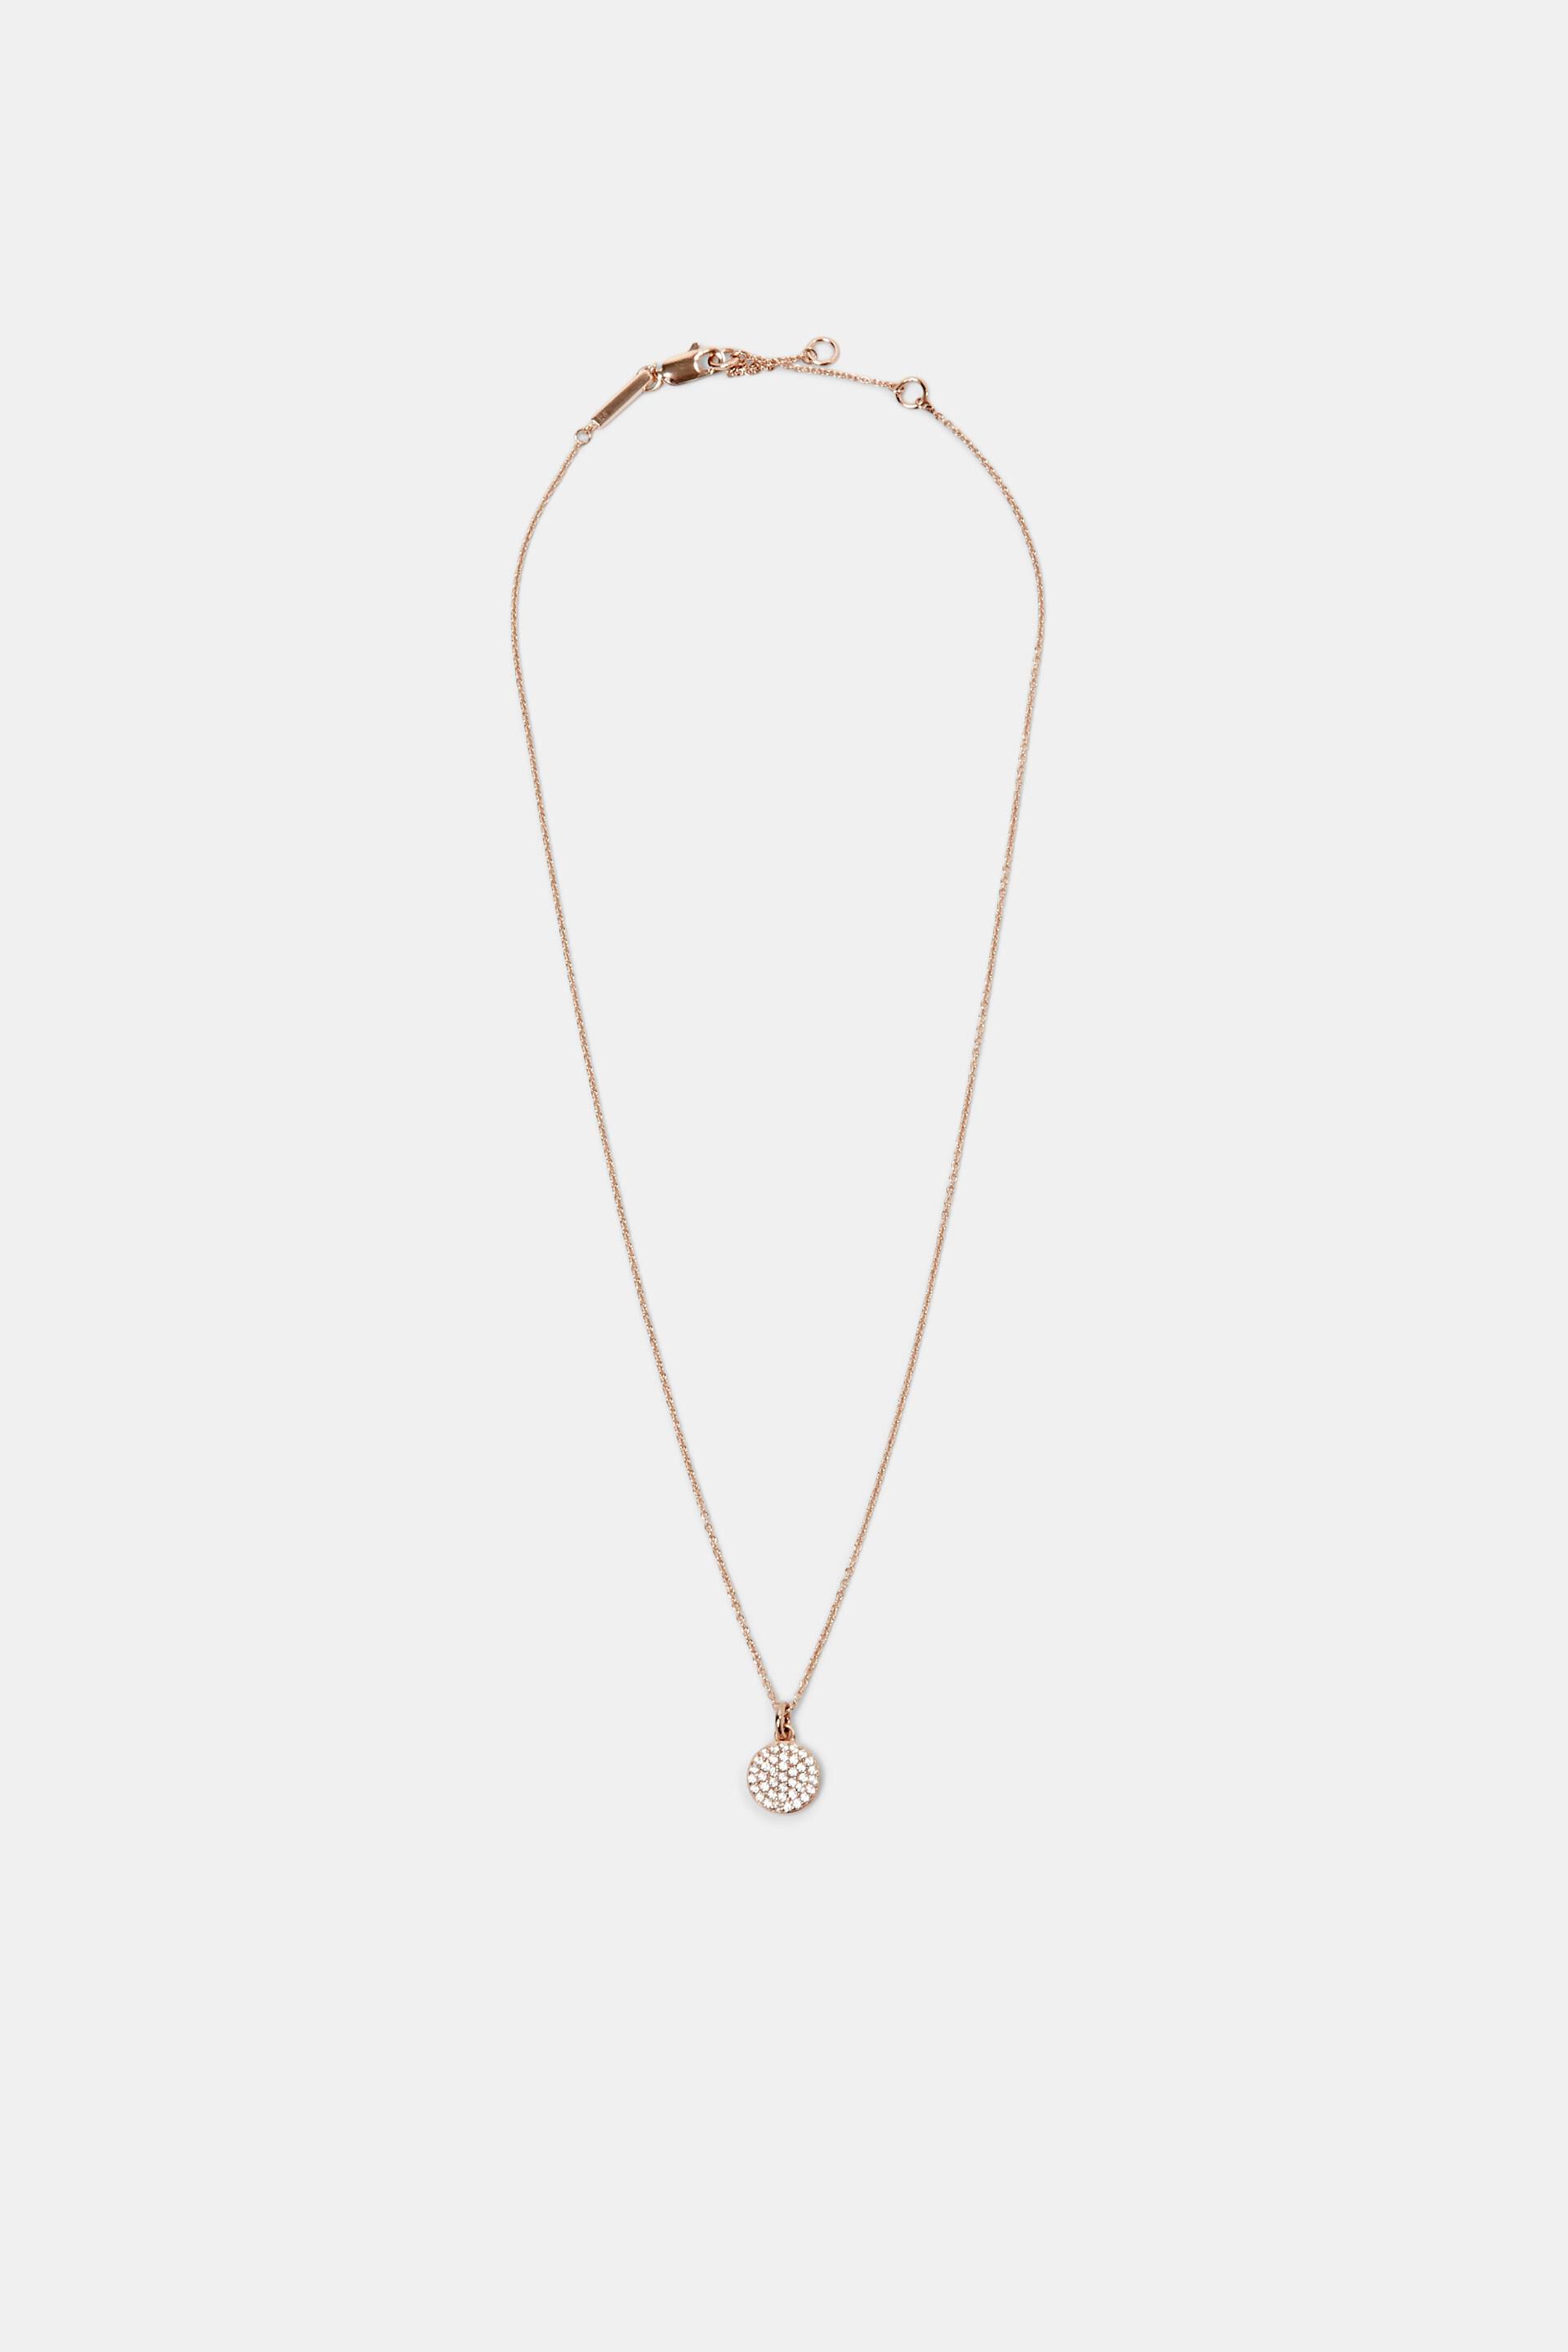 Esprit pendant, zirconia Necklace with sterling silver